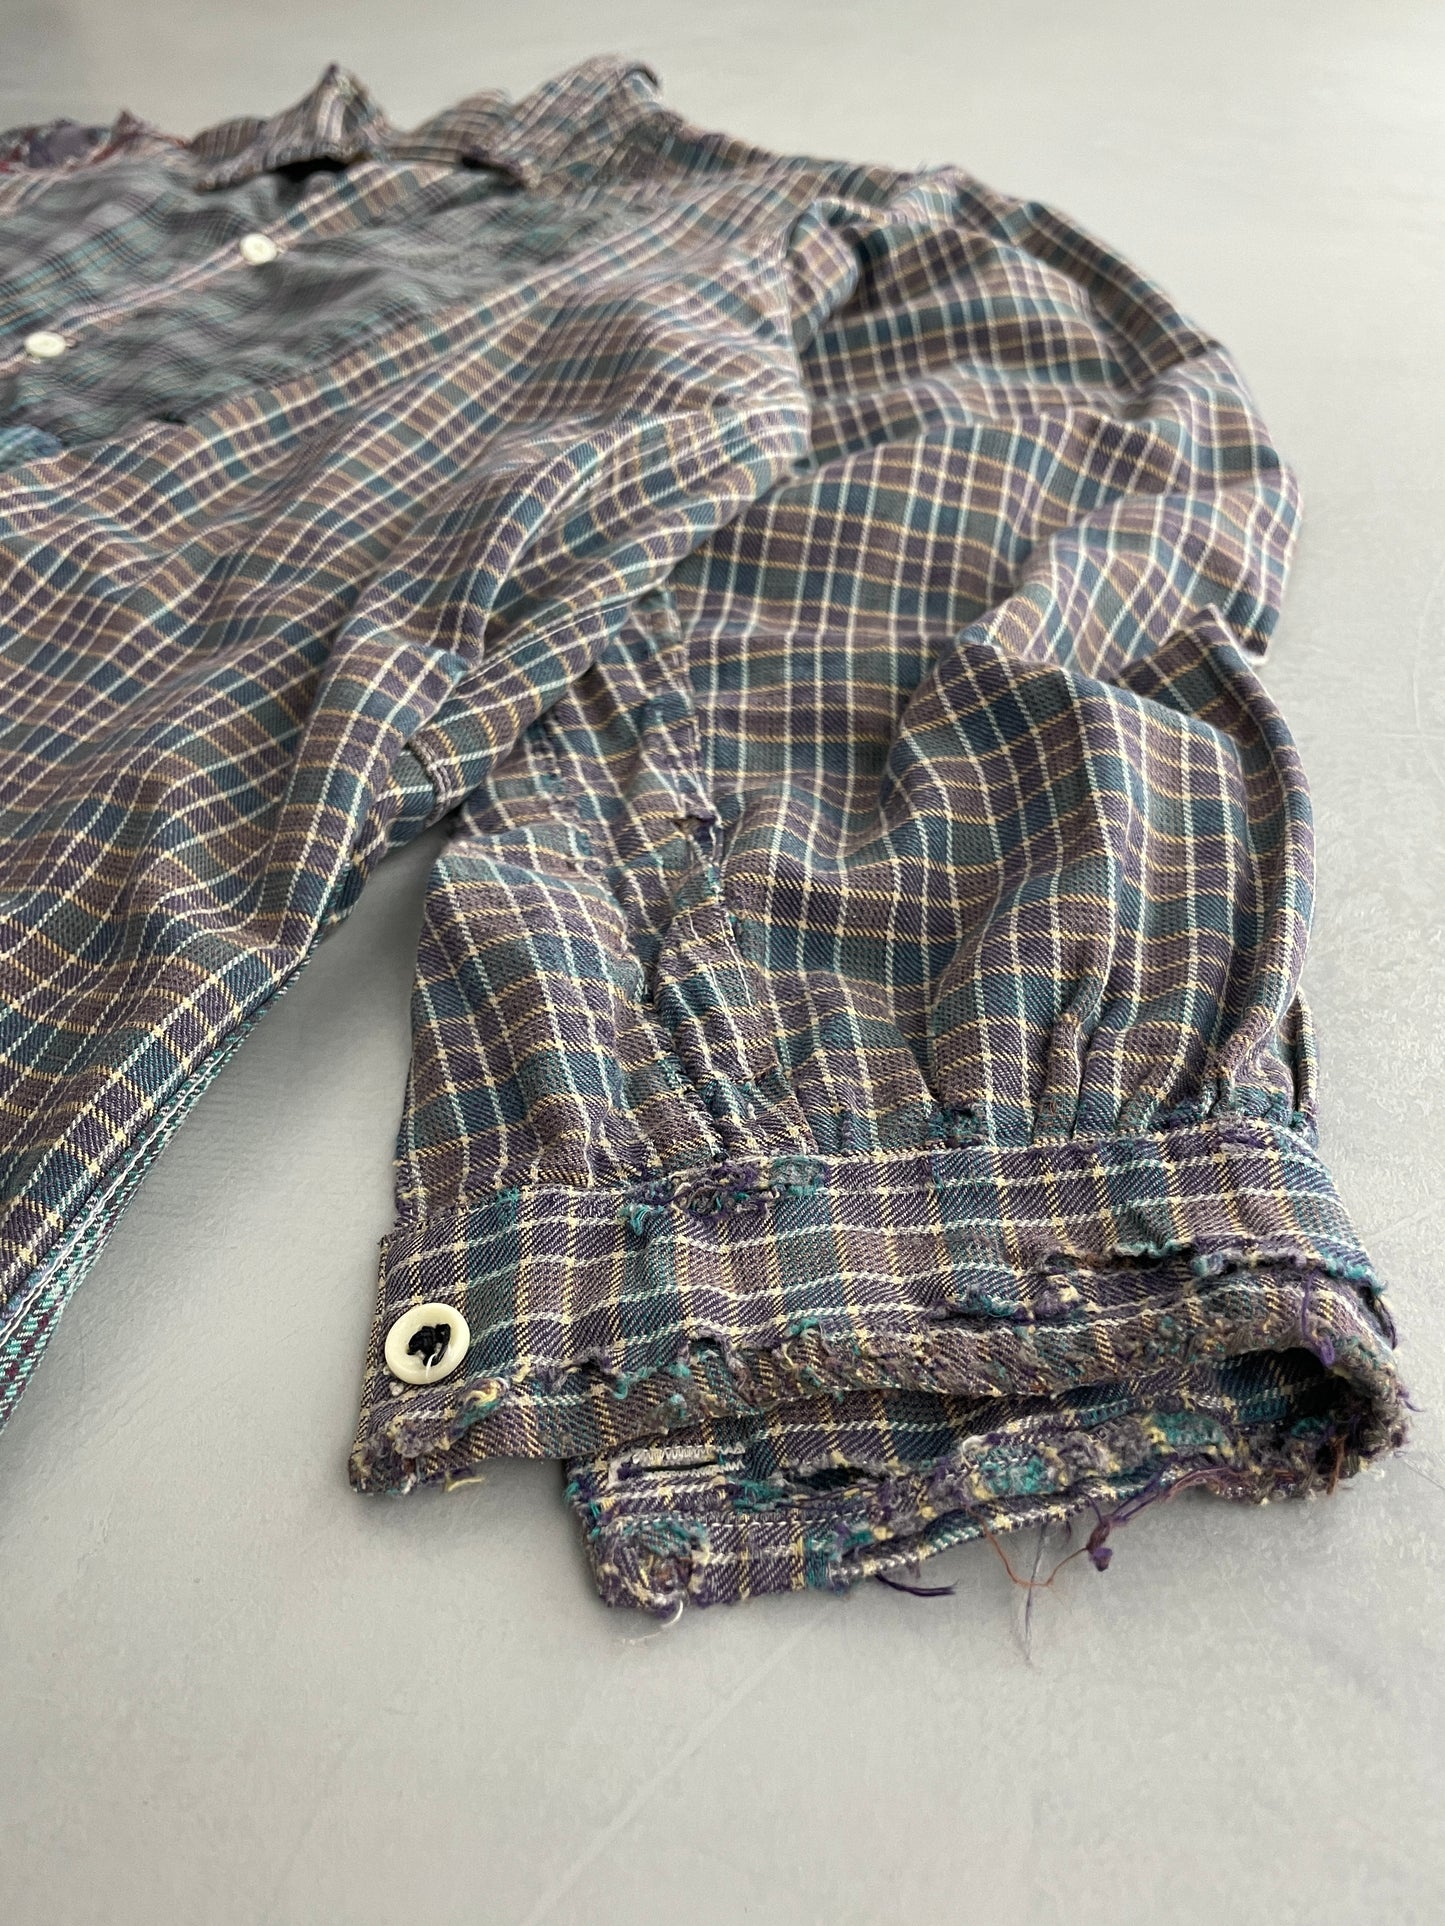 Heavily Repaired French Work Shirt [L]